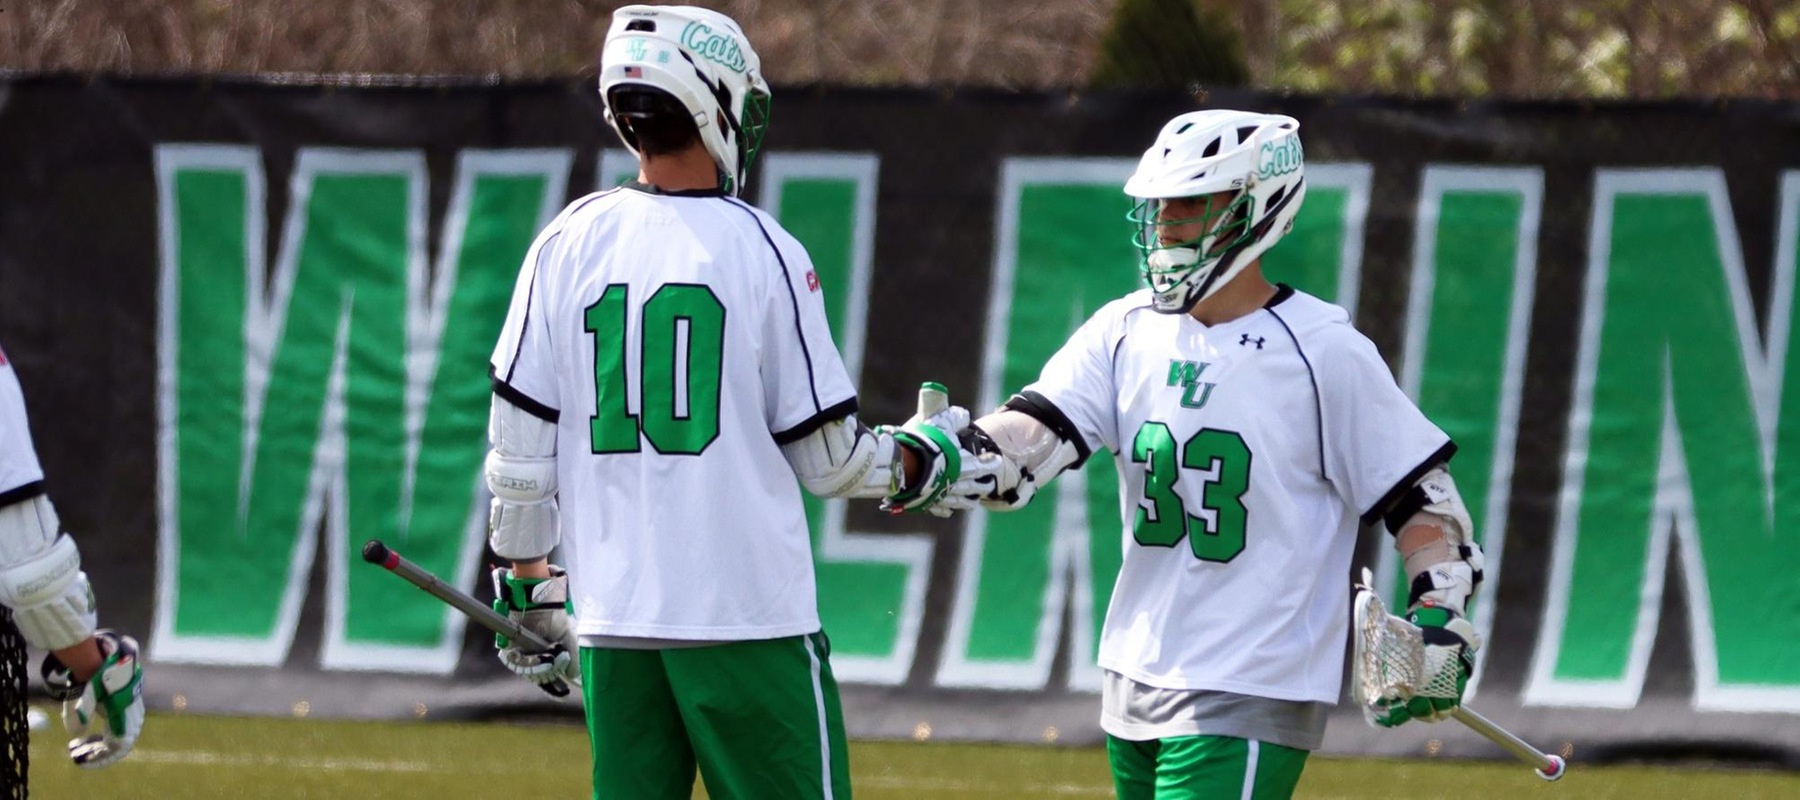 Photo of the team's top two leading scorers on Saturday, Jimmy Cava (10) and Giovanni Marino (33). Copyright 2021; Wilmington University. All rights reserved. Photo by Dan Lauletta. April 10, 2021 vs. Post at WU Athletics Complex.